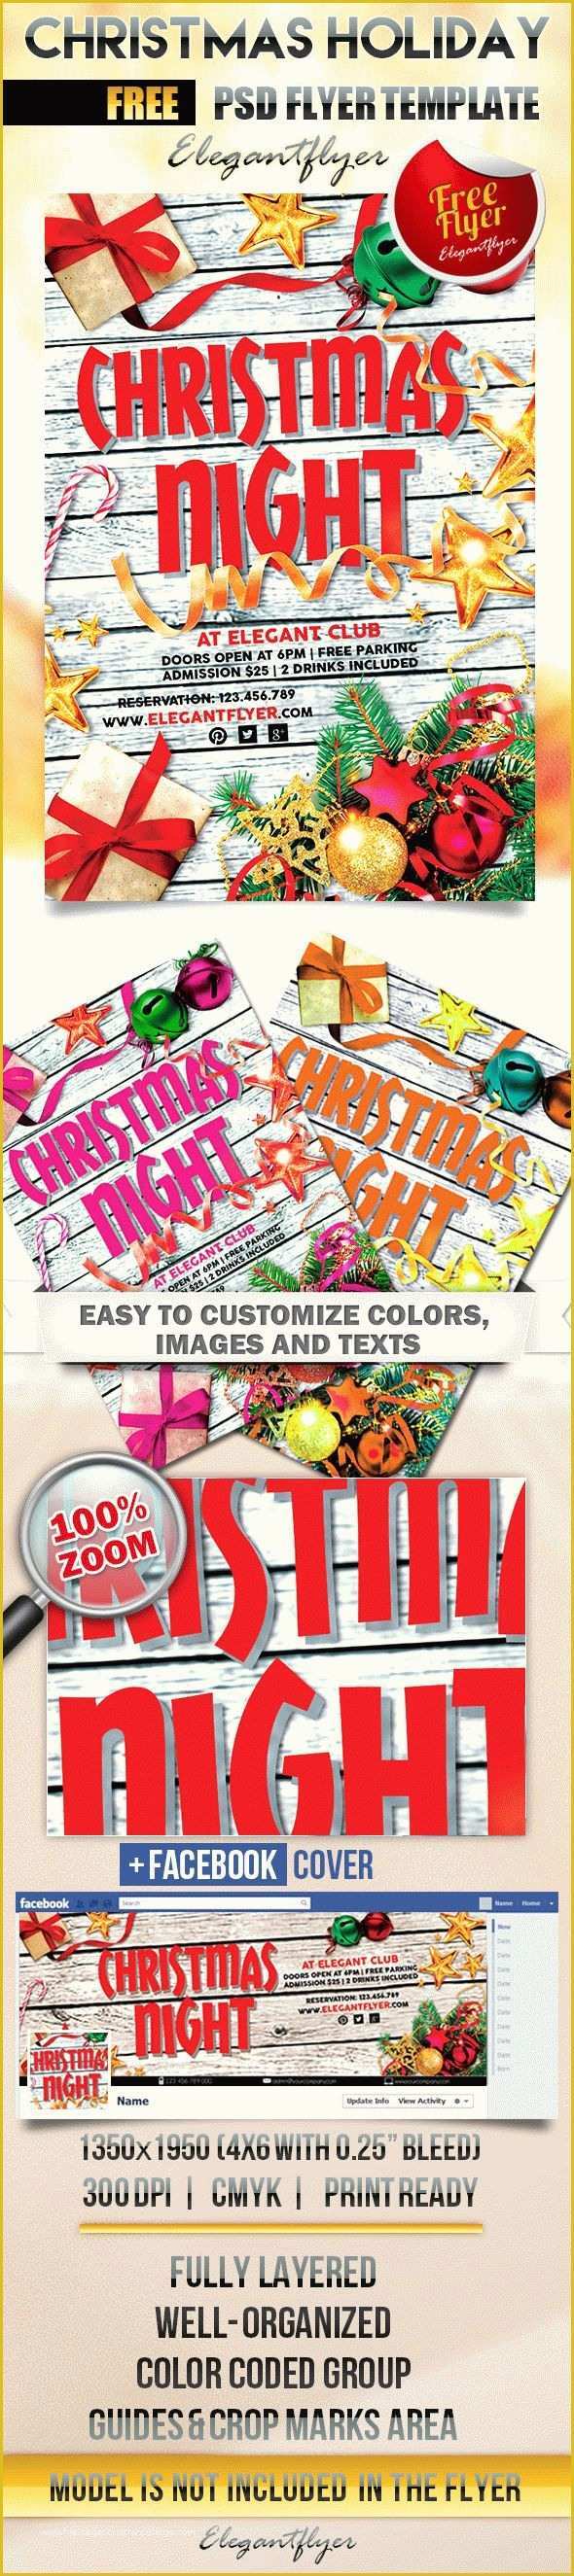 Free Christmas Flyer Templates Psd Of Christmas Holiday – Free Flyer Psd Template – by Elegantflyer